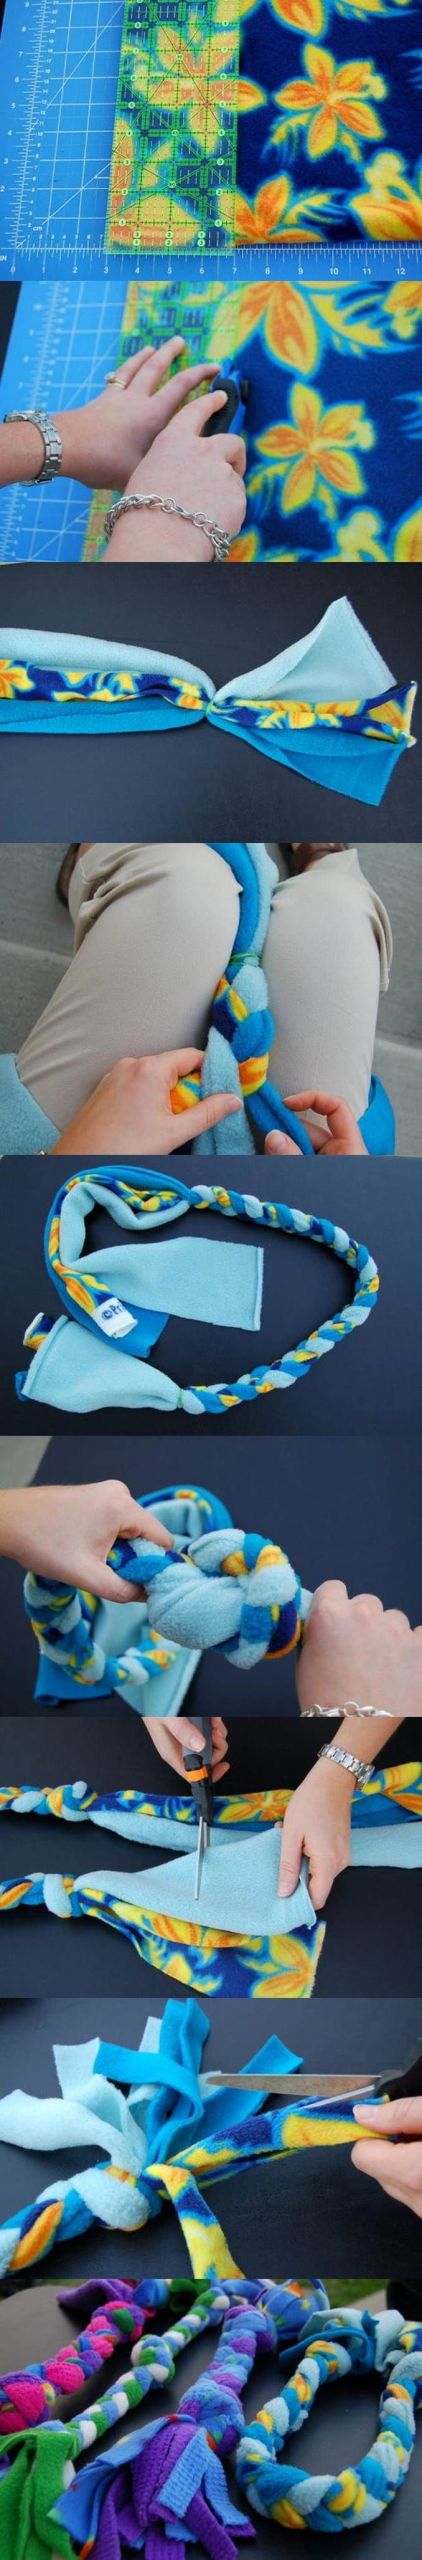 DIY Fleece Dog Toy
 DIY Fleece Rope Dog Toy 2 Has dimensions I make these for